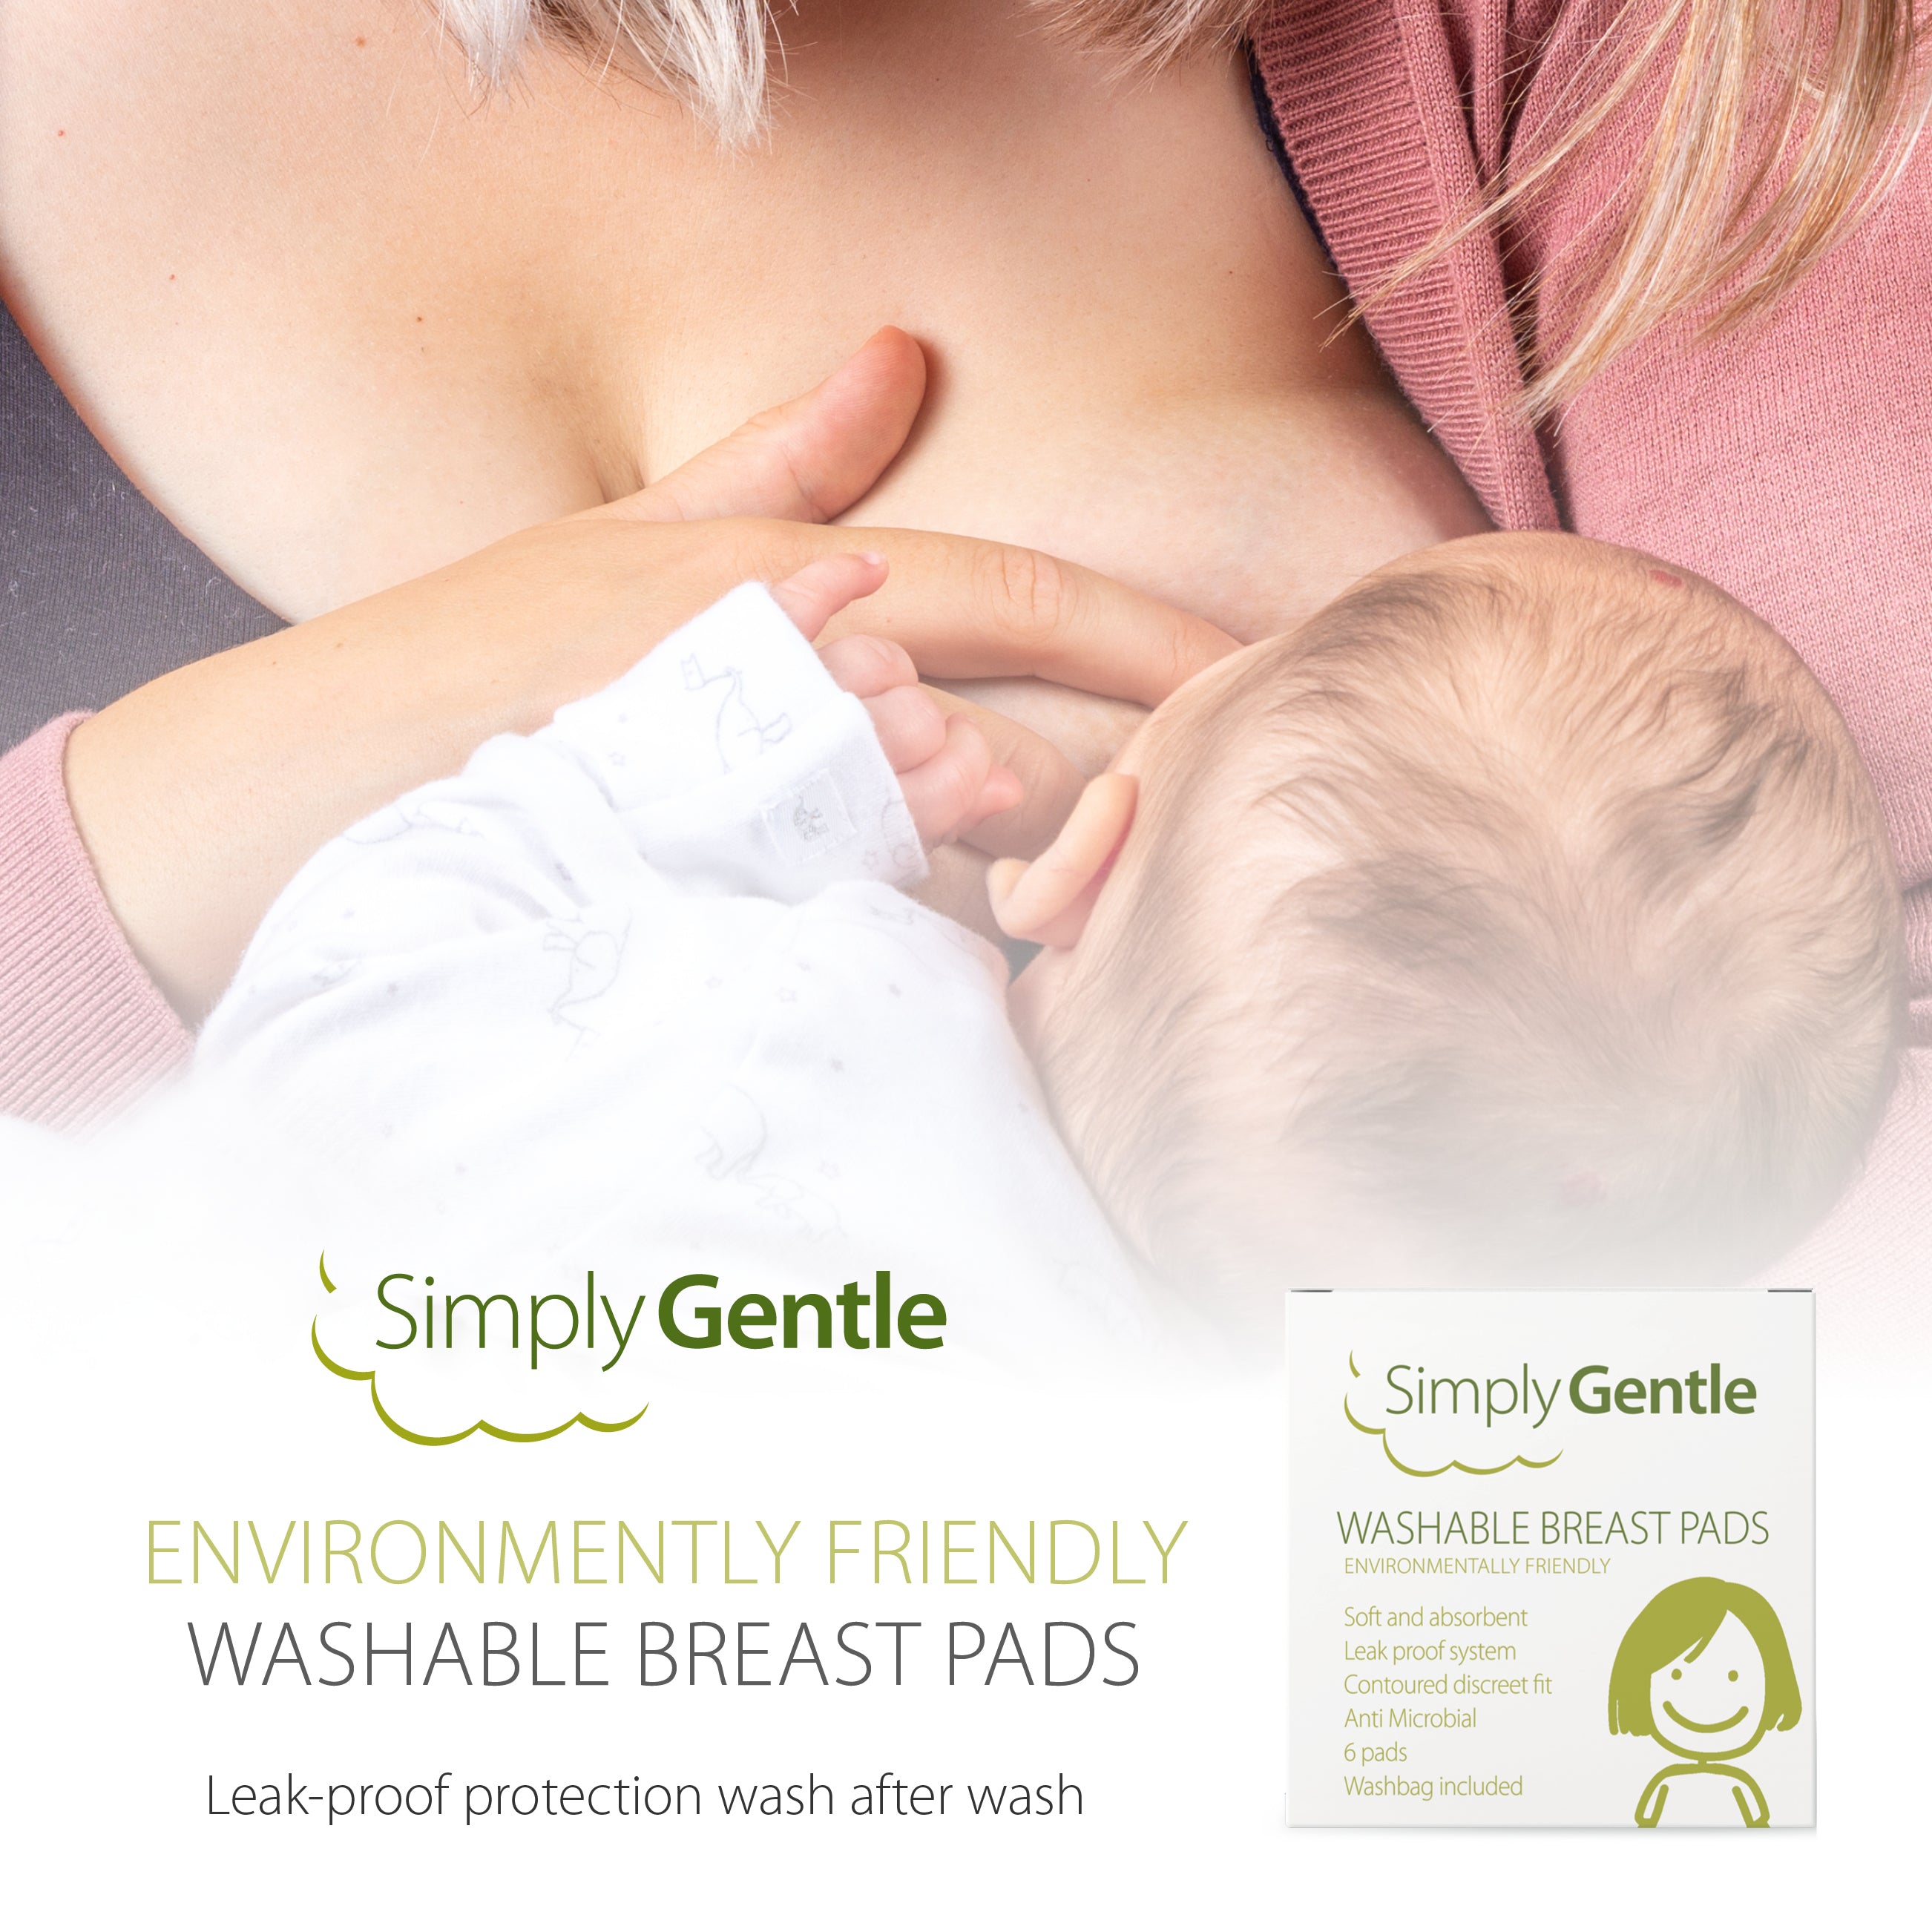 Simply Gentle Washable Breast Pads have been especially designed for use in late pregnancy, after the birth of your baby and whilst breastfeeding to provide security and protection from excess breast milk. The pads soften with each wash. Leak proof system, with a contoured discreet fit and anti Microbial. Environmentally friendly.